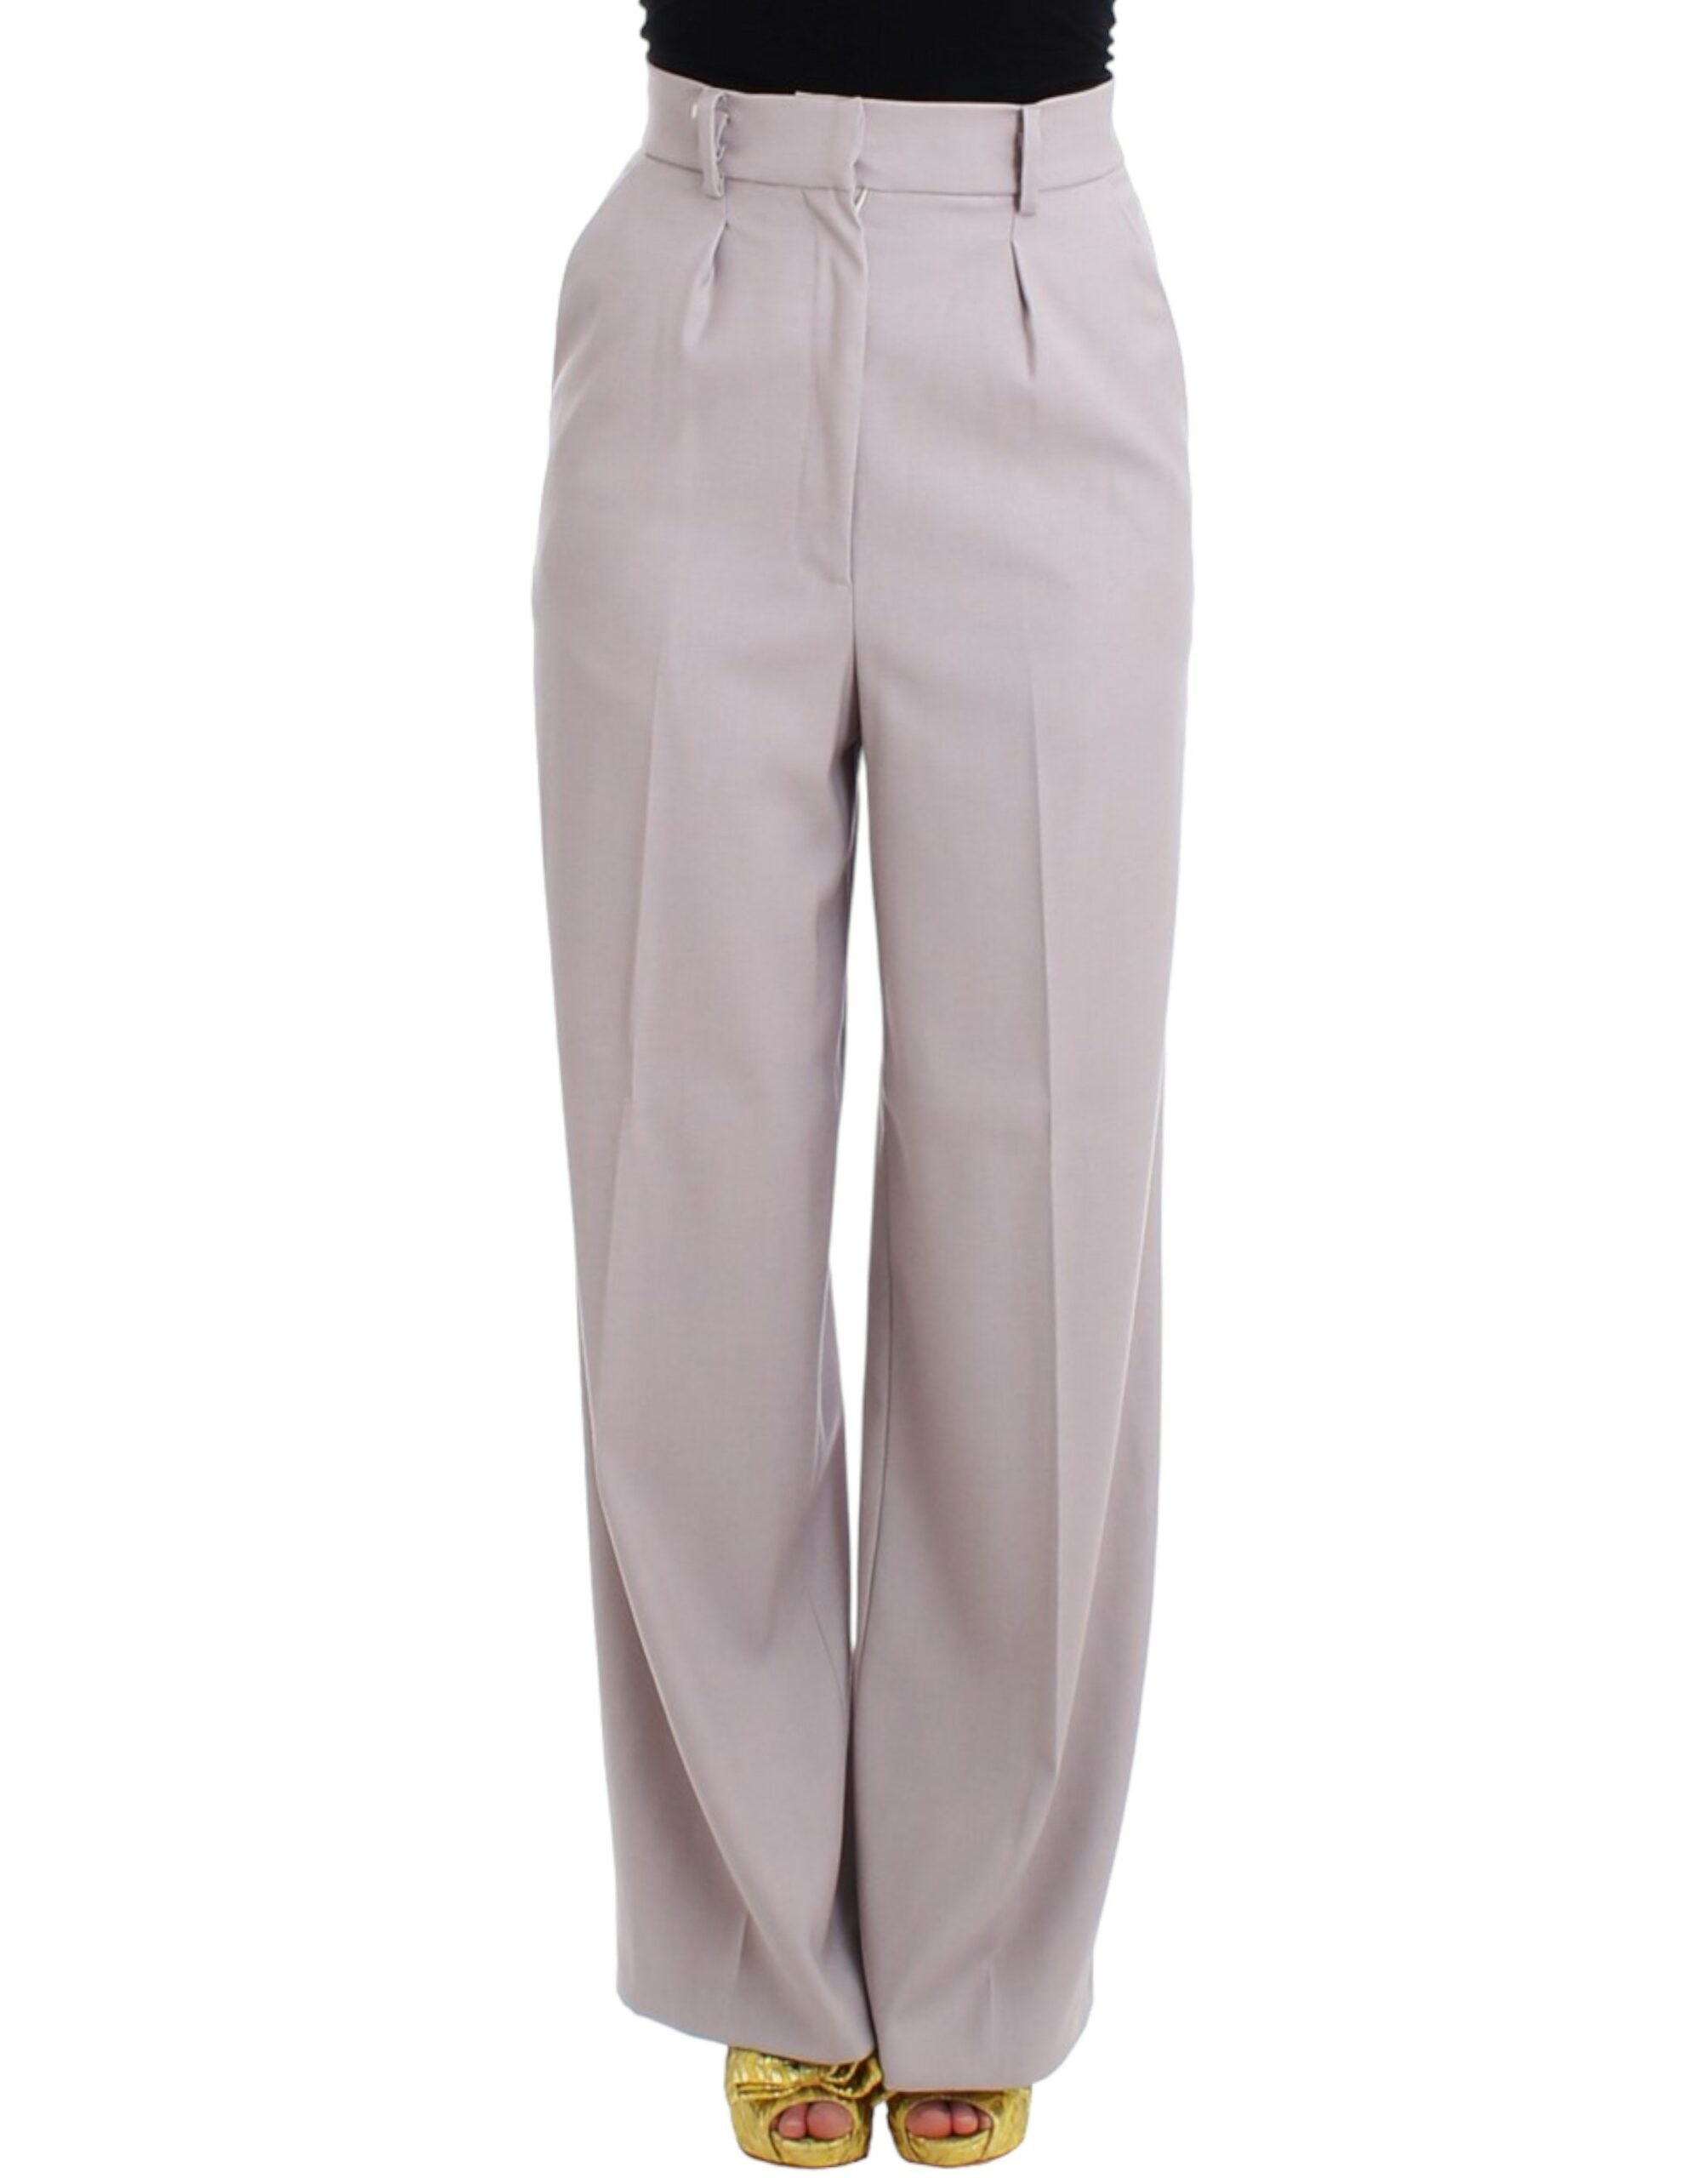 Sophisticated High Waisted Gray Pants